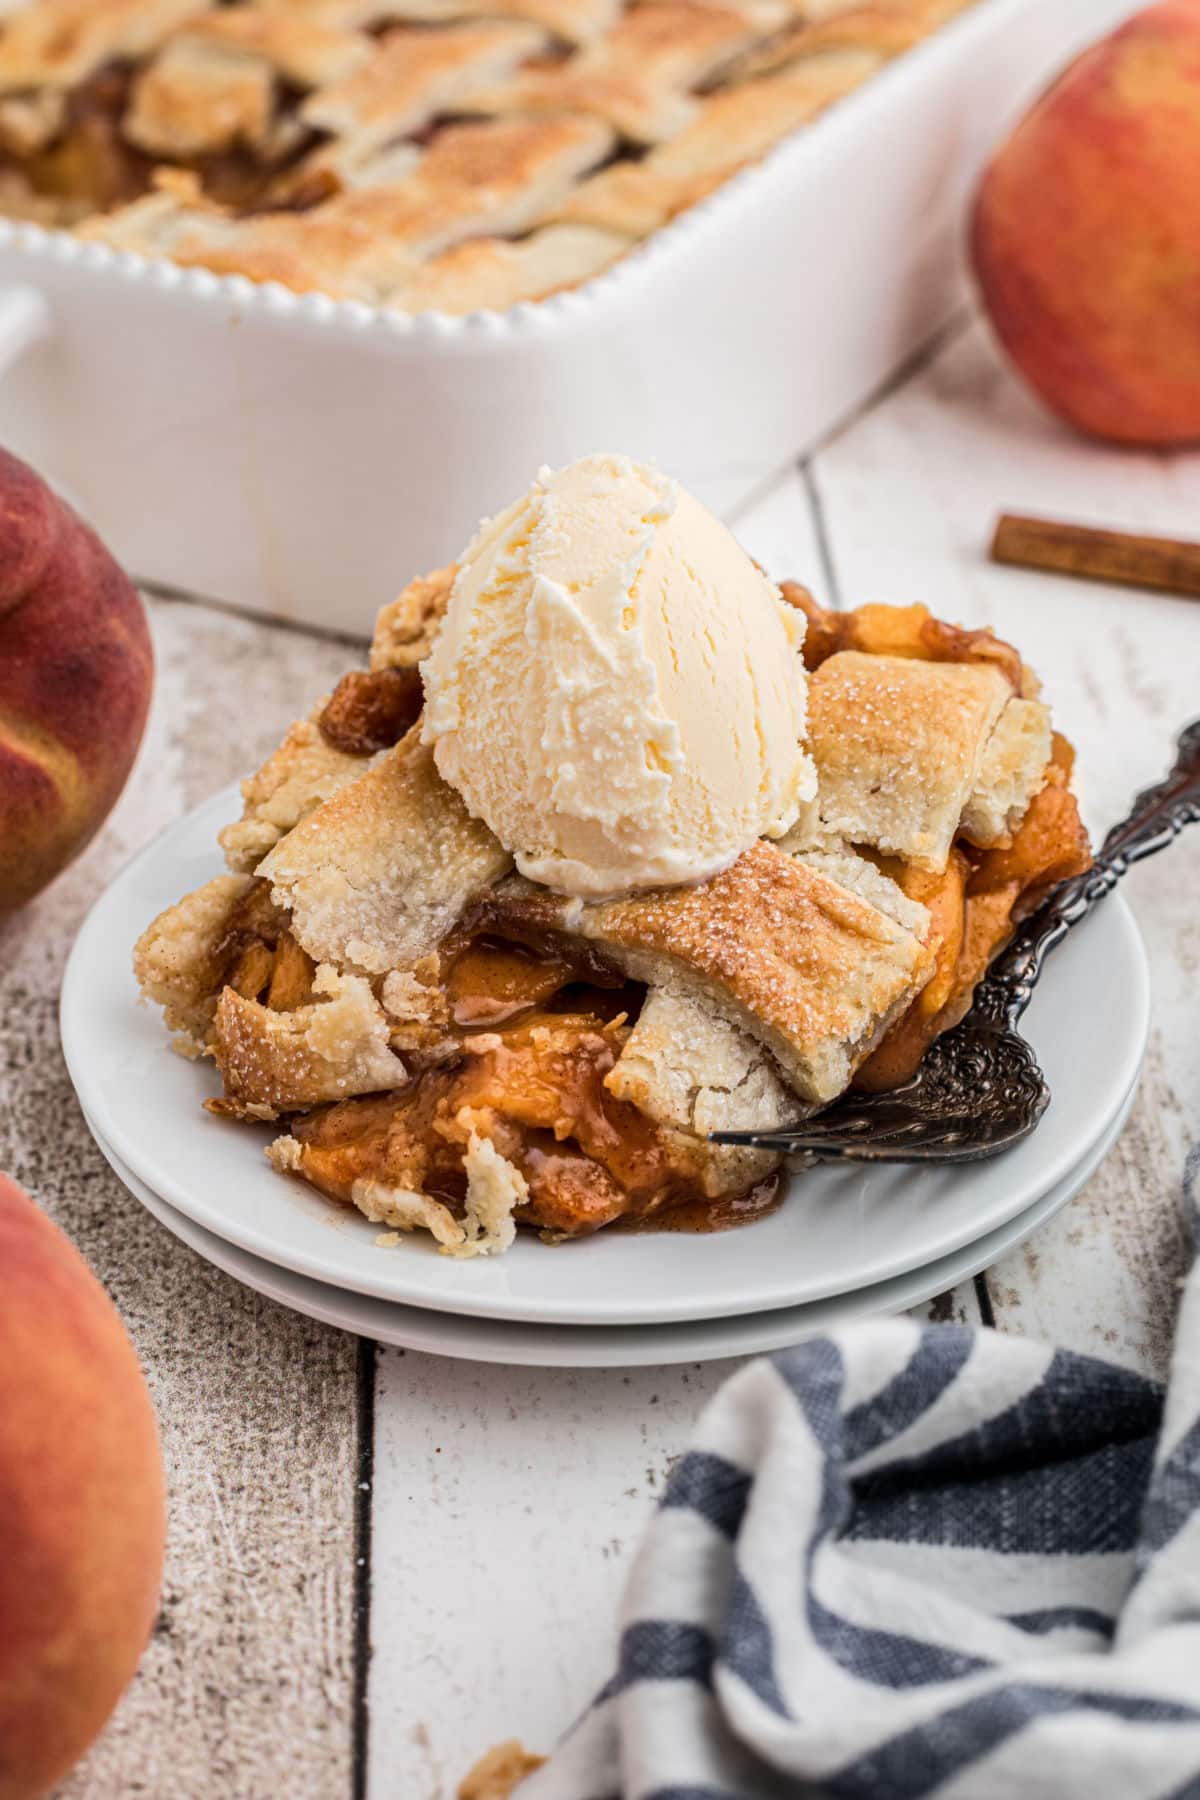 Dished out plate of southern peach cobbler with pie crust, and a scoop of ice cream on top.